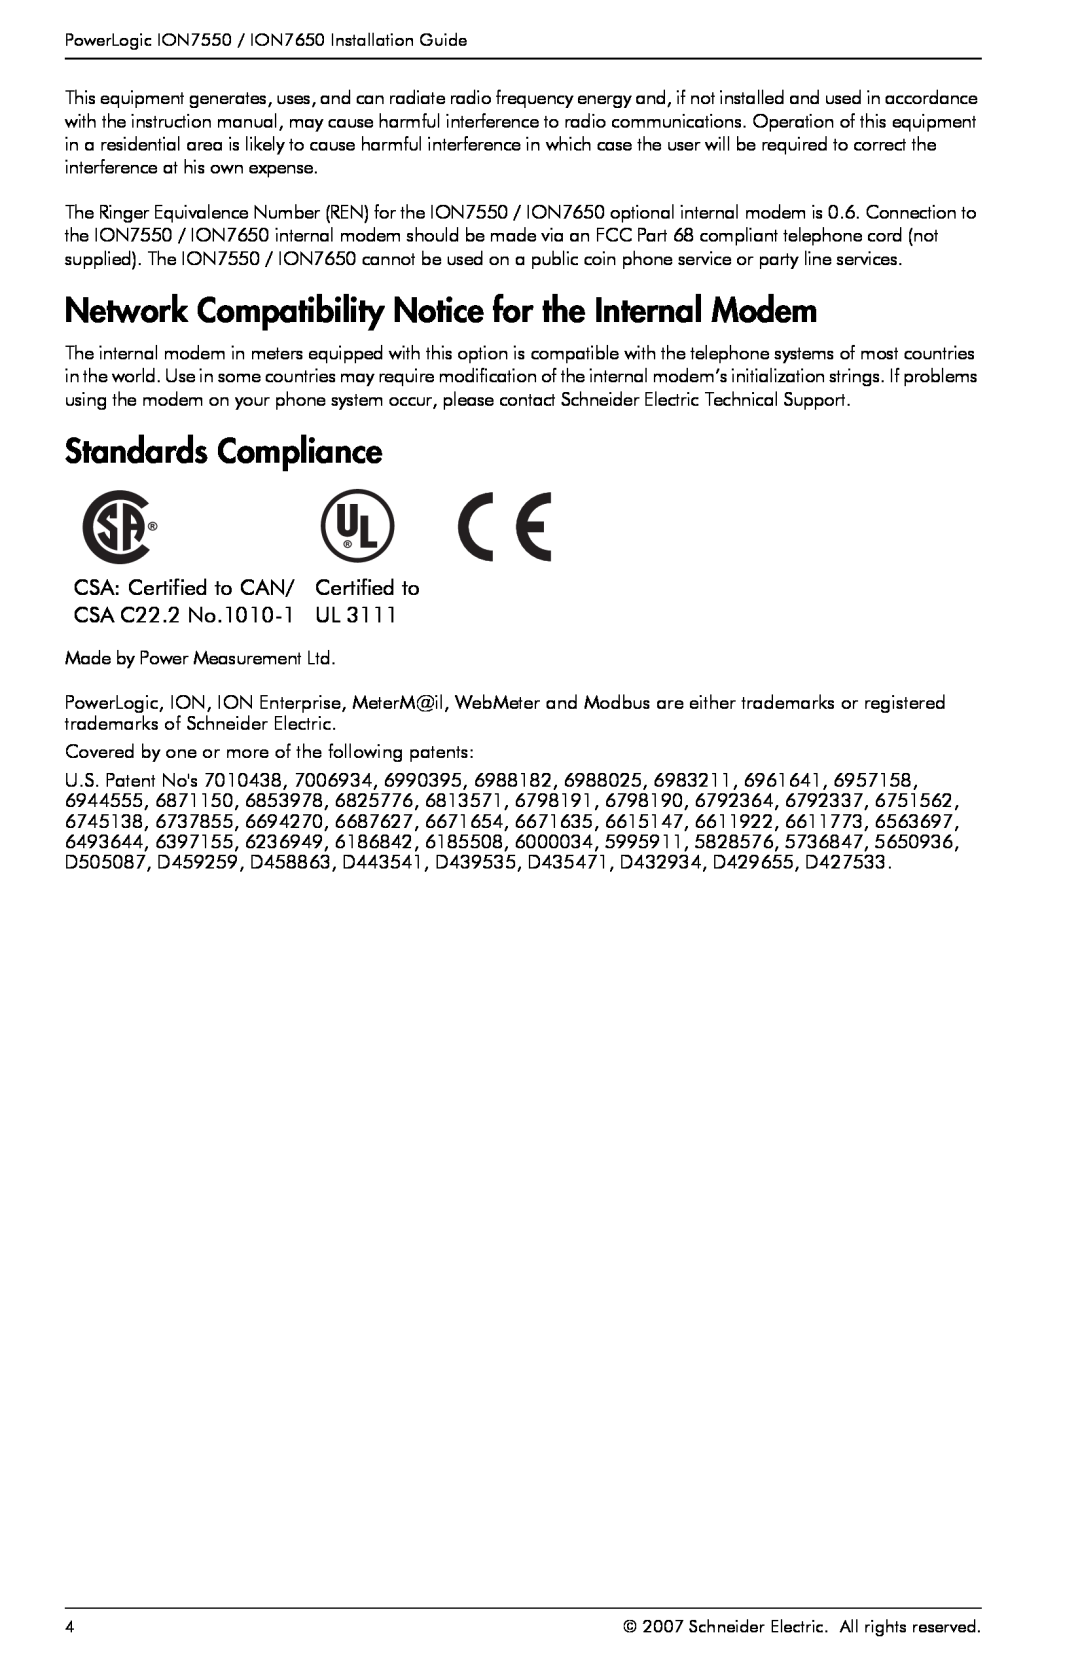 Schneider Electric ION7650 Network Compatibility Notice for the Internal Modem, Standards Compliance, CSA Certified to CAN 